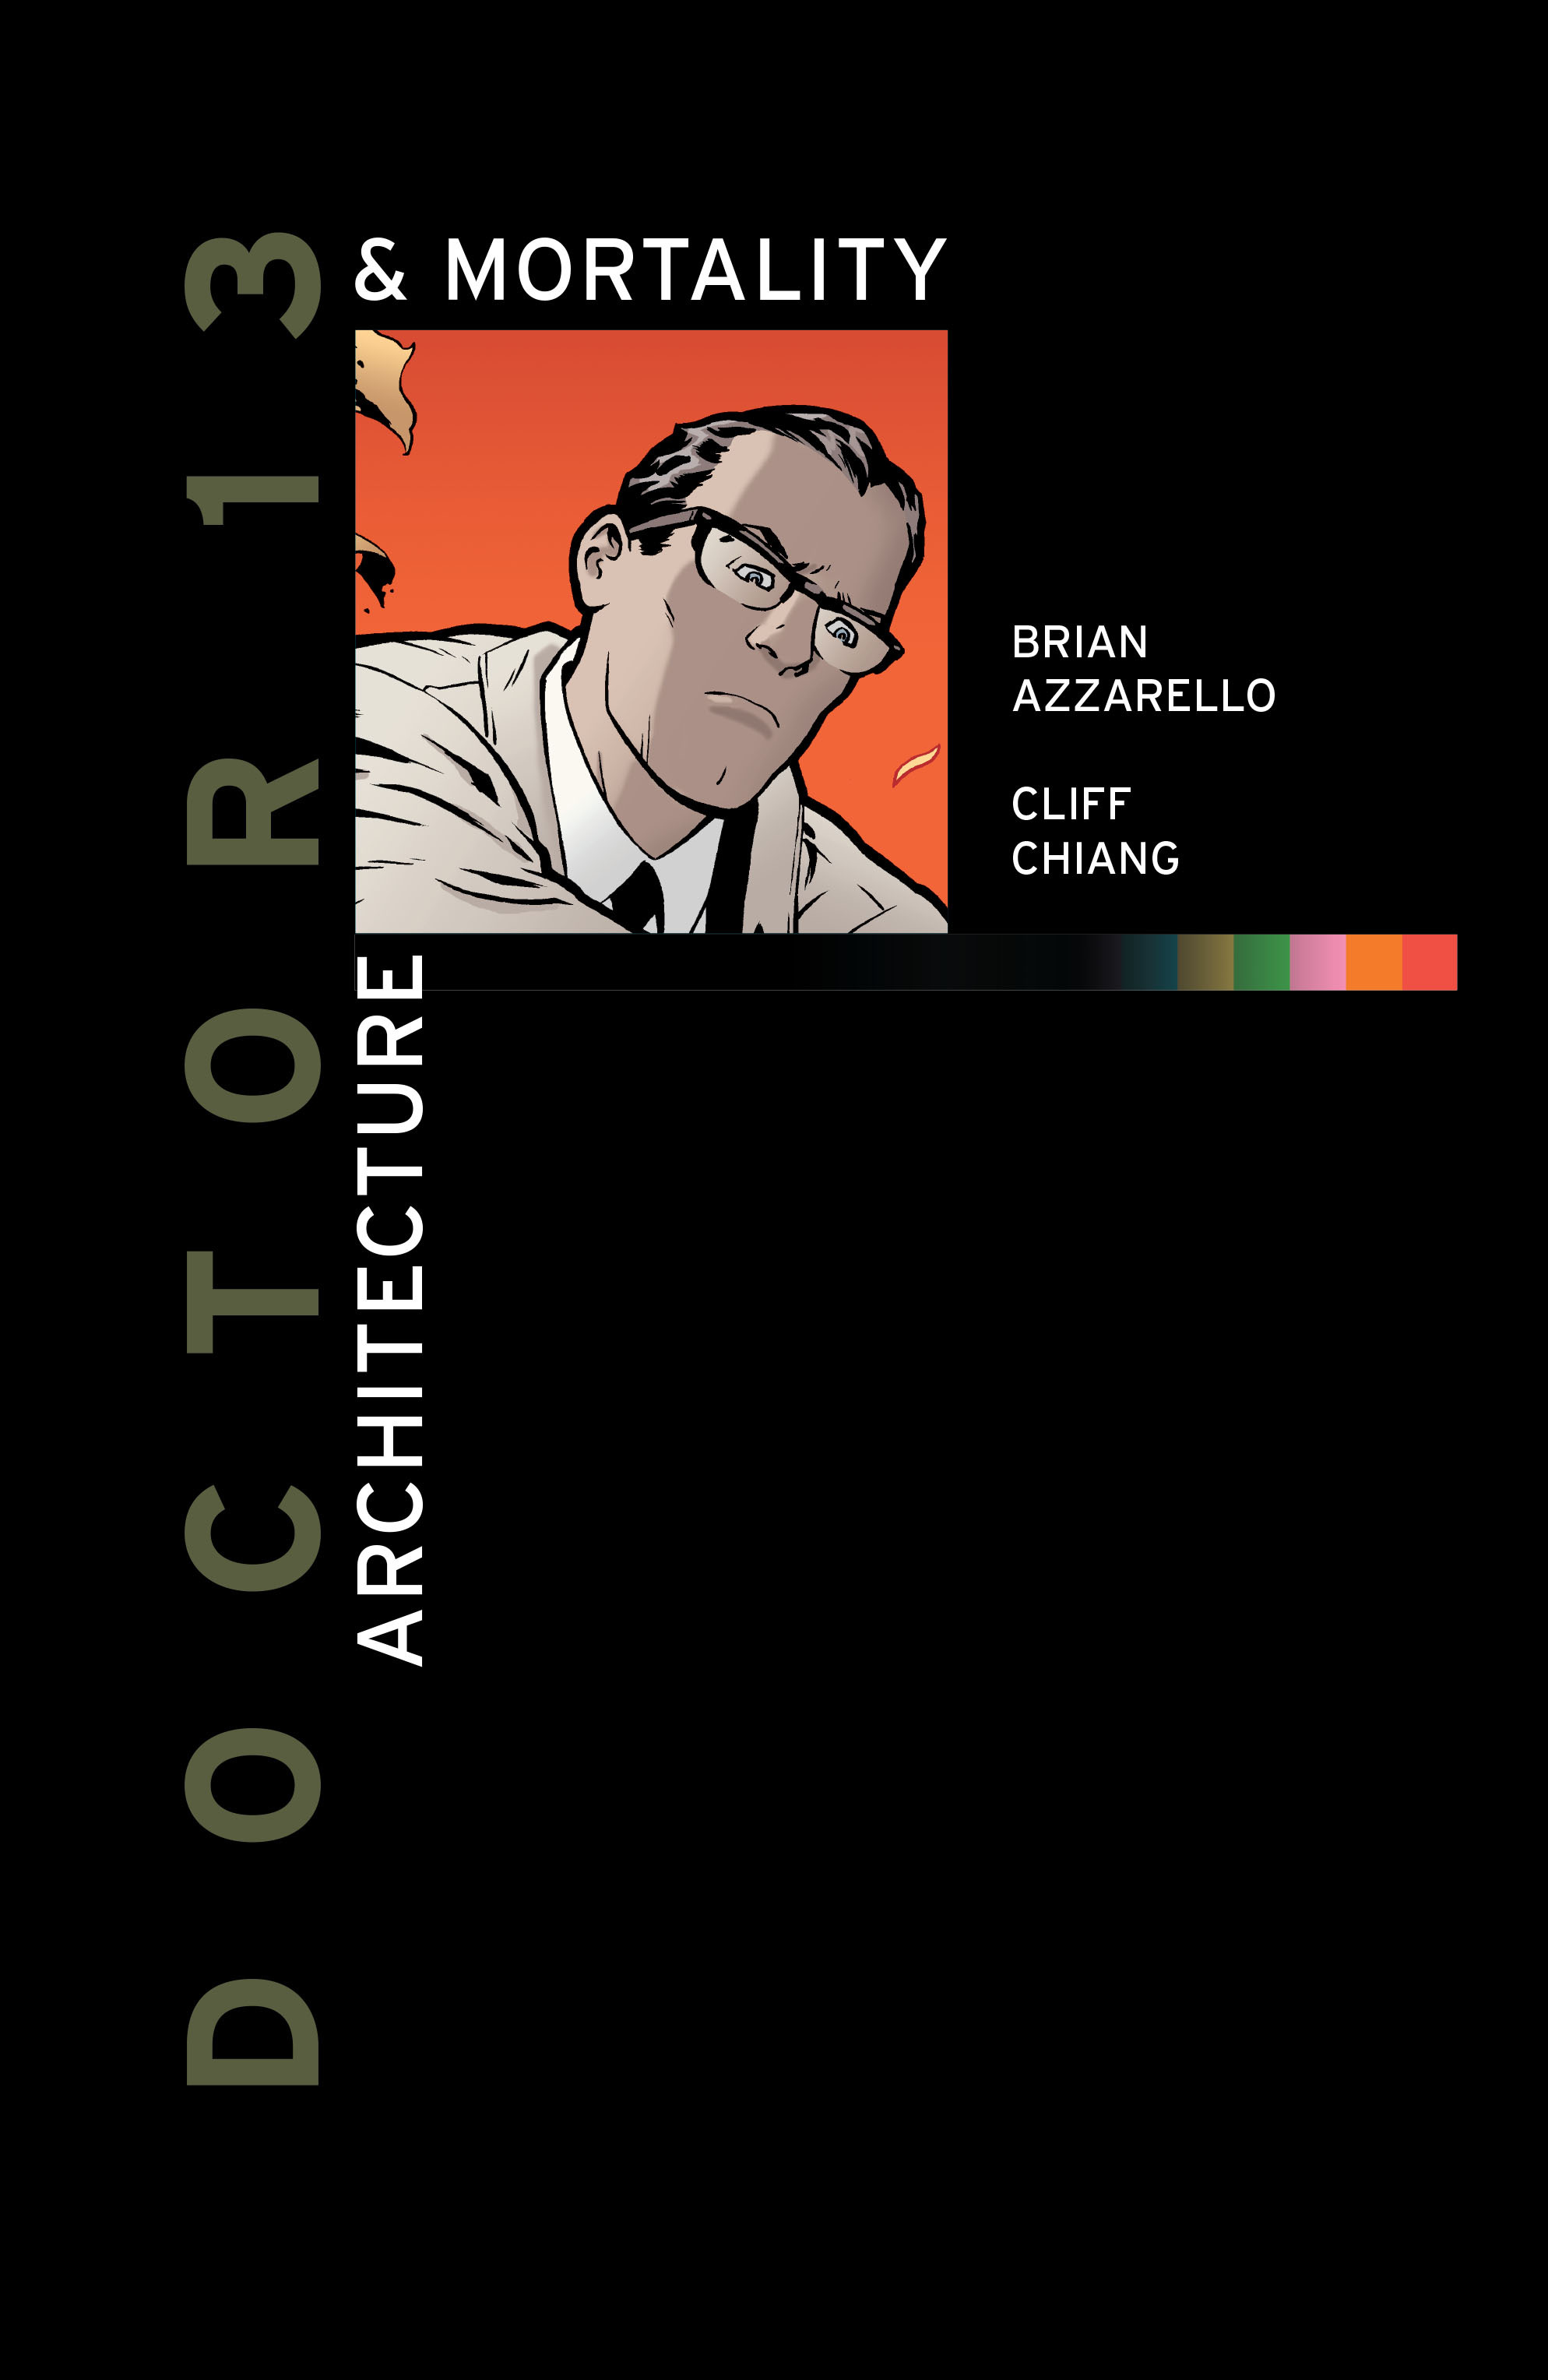 Read online Doctor 13: Architecture & Mortality comic -  Issue # Full - 2